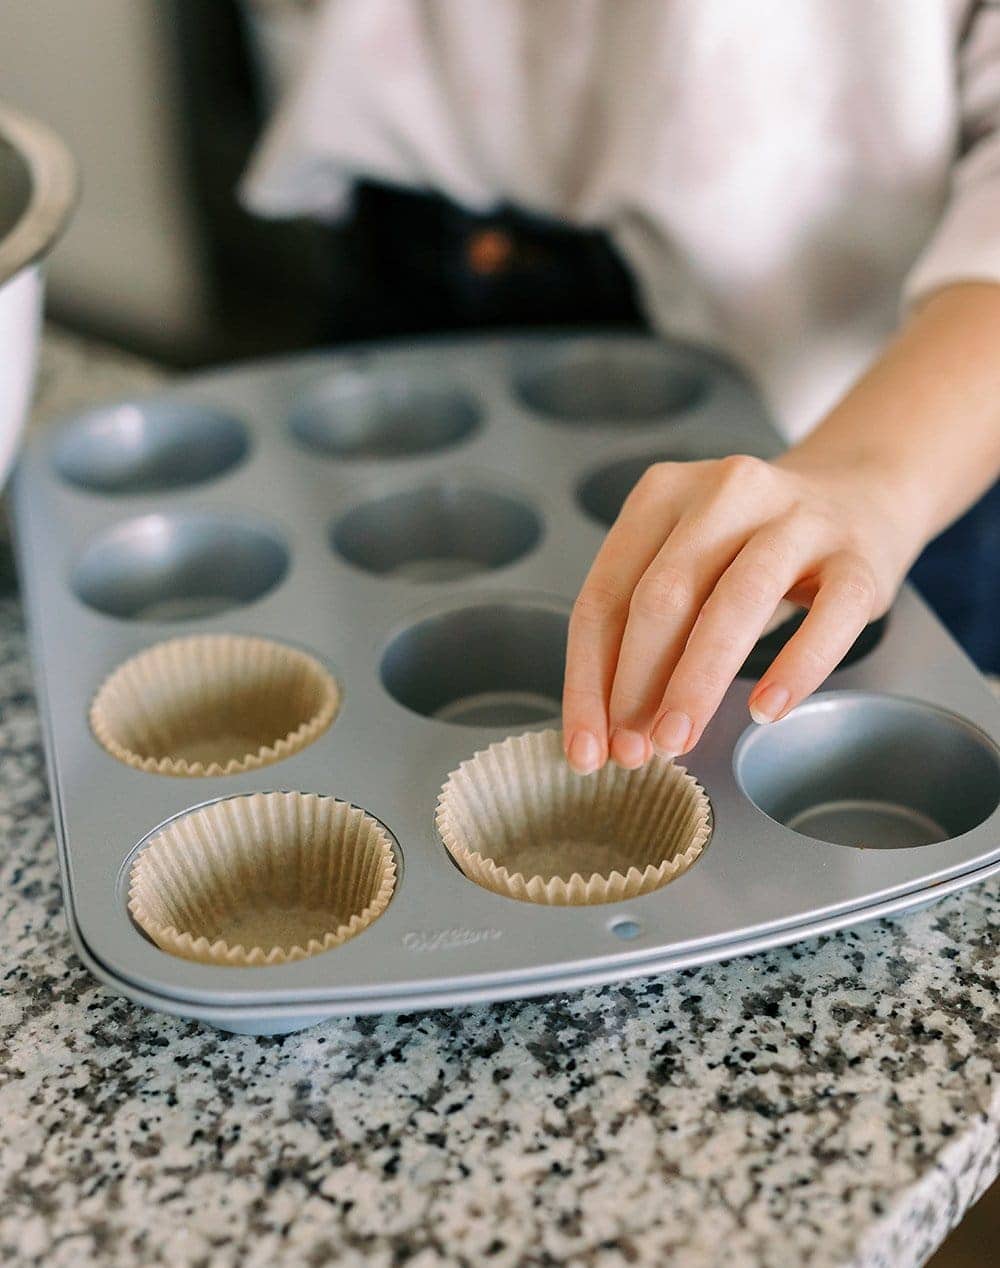 cupcake liners being placed in cupcake tin to bake cupcakes.